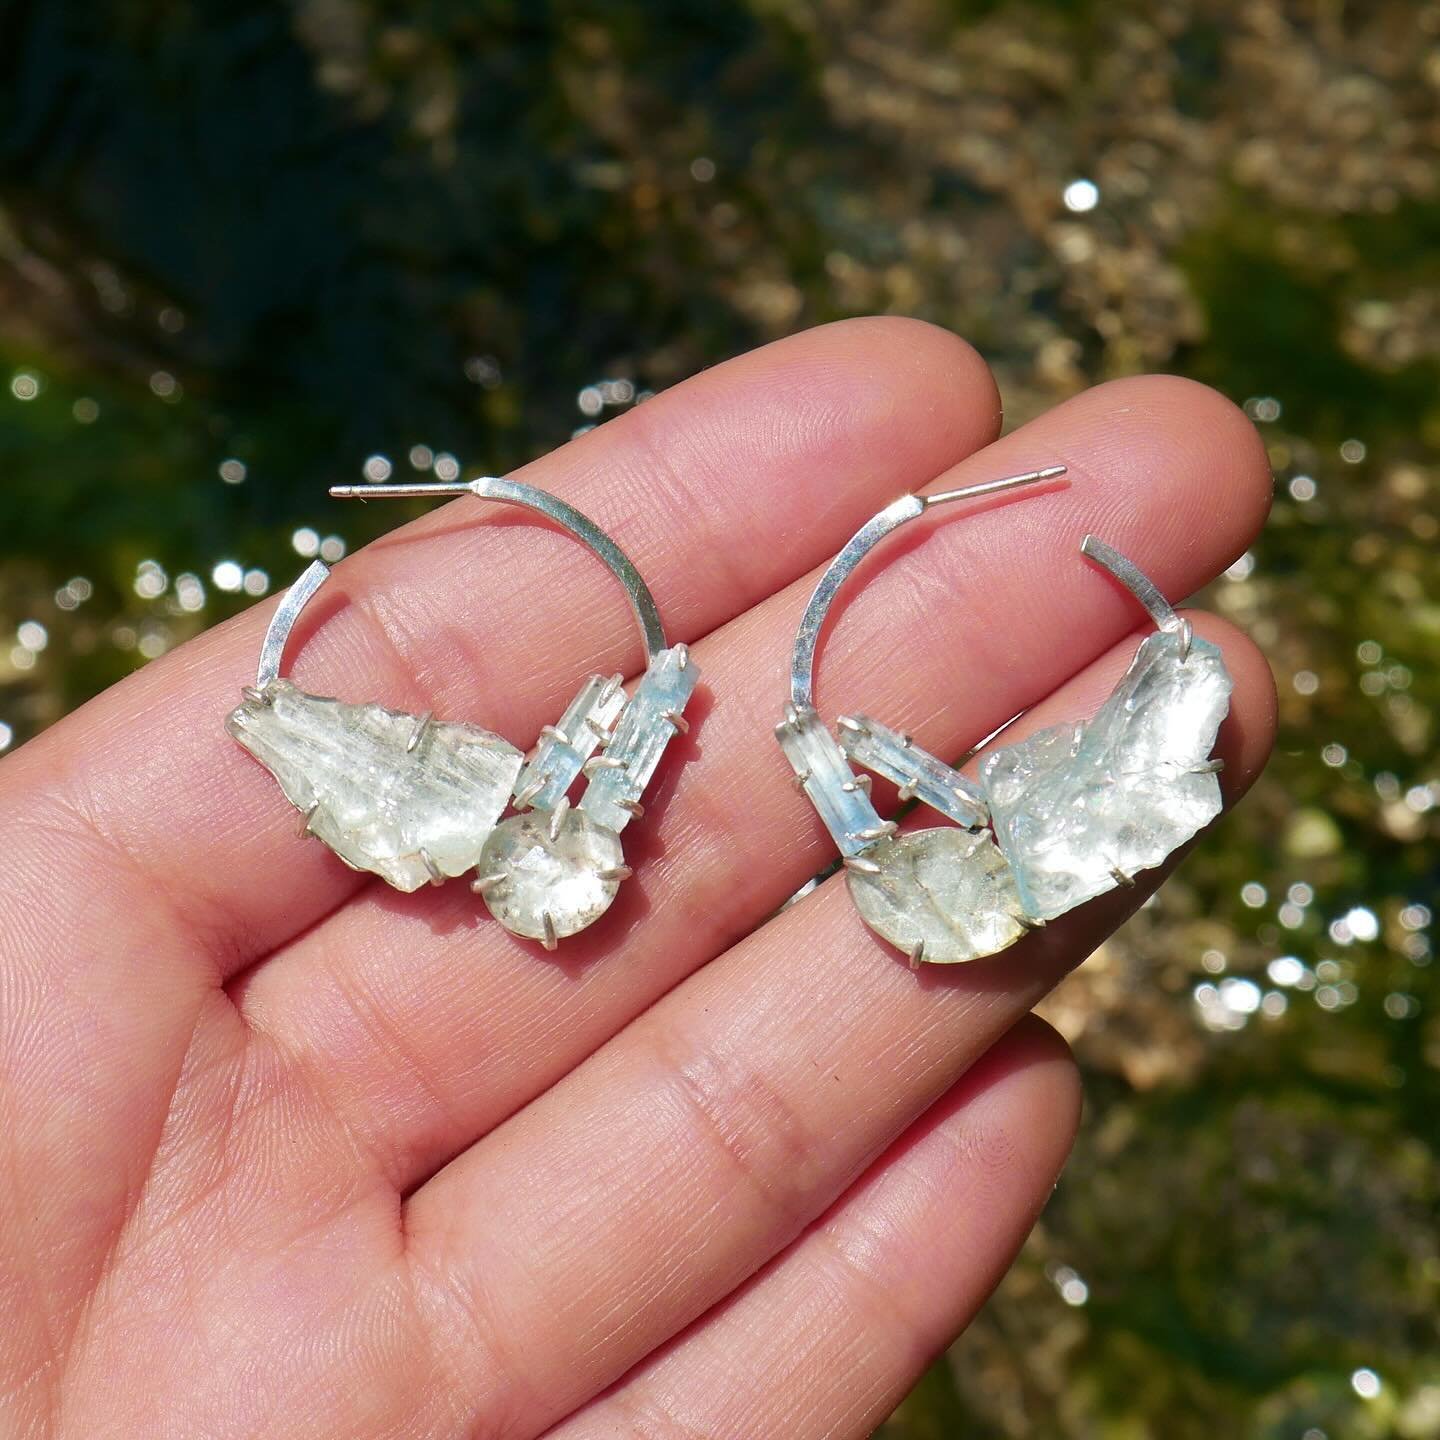 Pisces season is upon us! And I&rsquo;m sure you have a special Pisces in your life ✨ I&rsquo;ll be having my Pisces Drop💧 the first week in March but these babies are available now! 💎
&bull;
&bull;
&bull;
#hoopearrings #aquamarine #aquamarinejewel